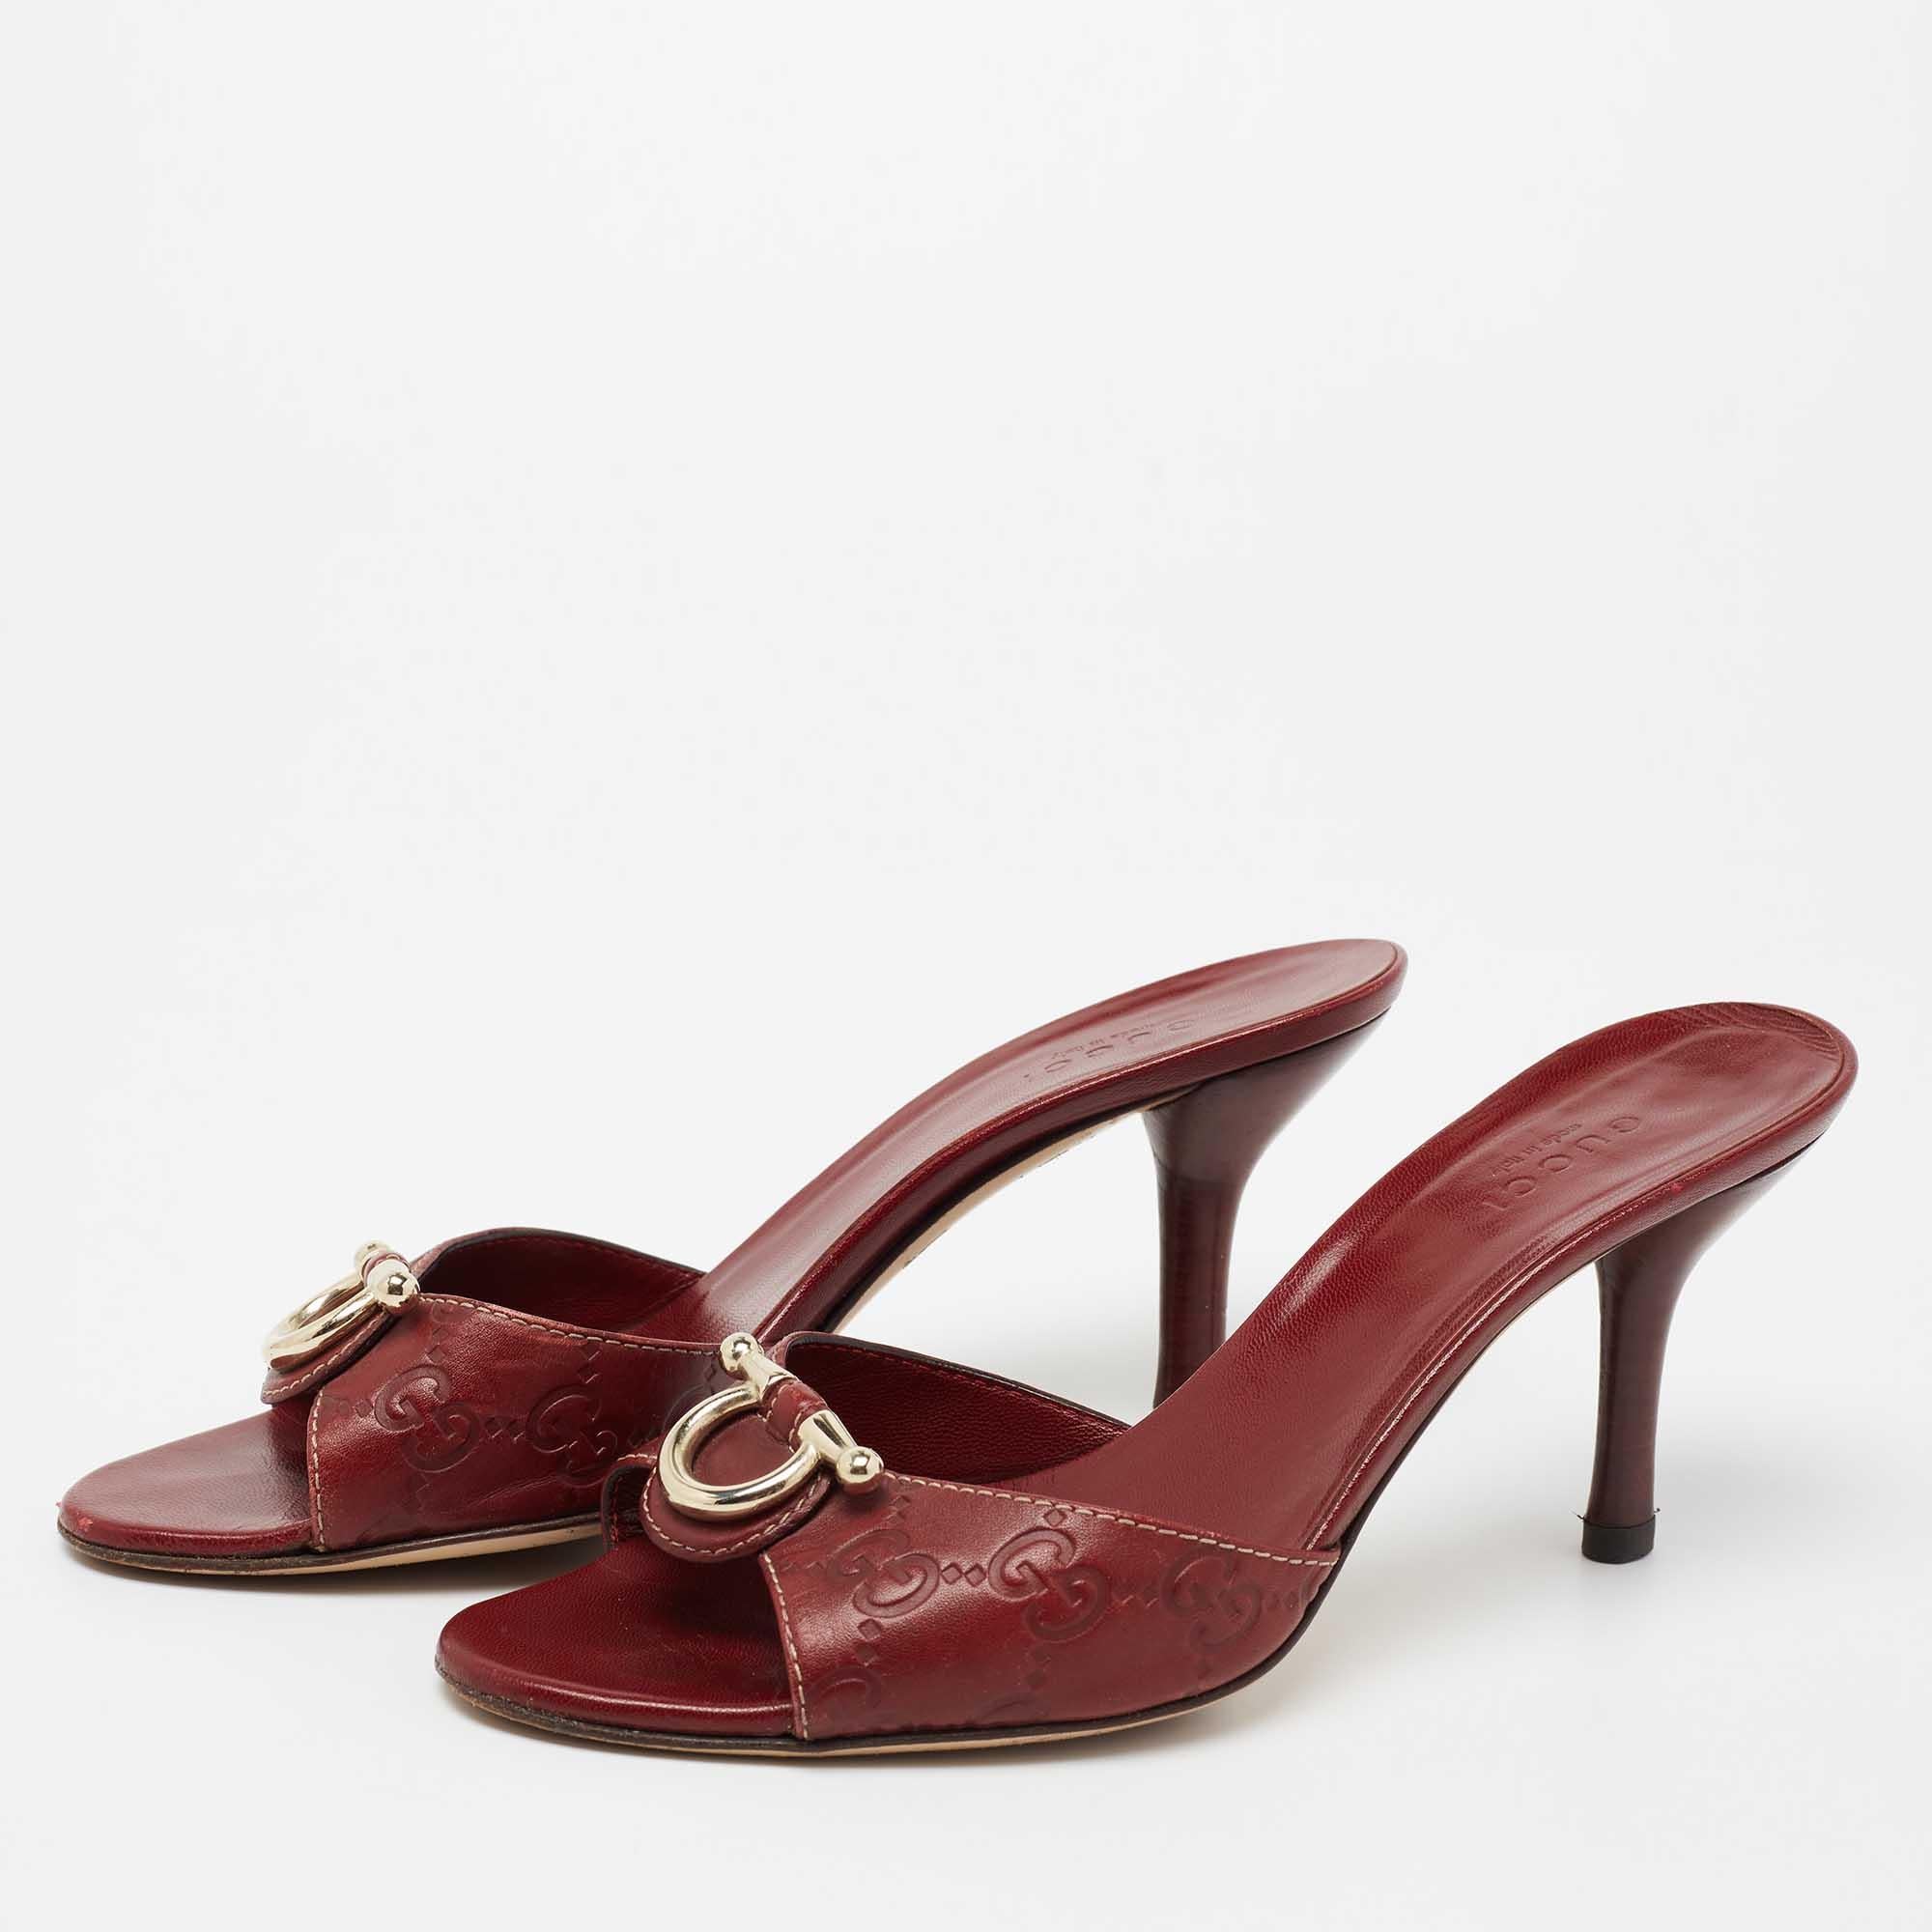 Traditional elements get a contemporary update with the design of these Gucci sandals. Detailed with Guccisima leather, the front strap is adorned with a Horsebit motif, and it is easy to slide into this open-toe silhouette.

Includes: Original